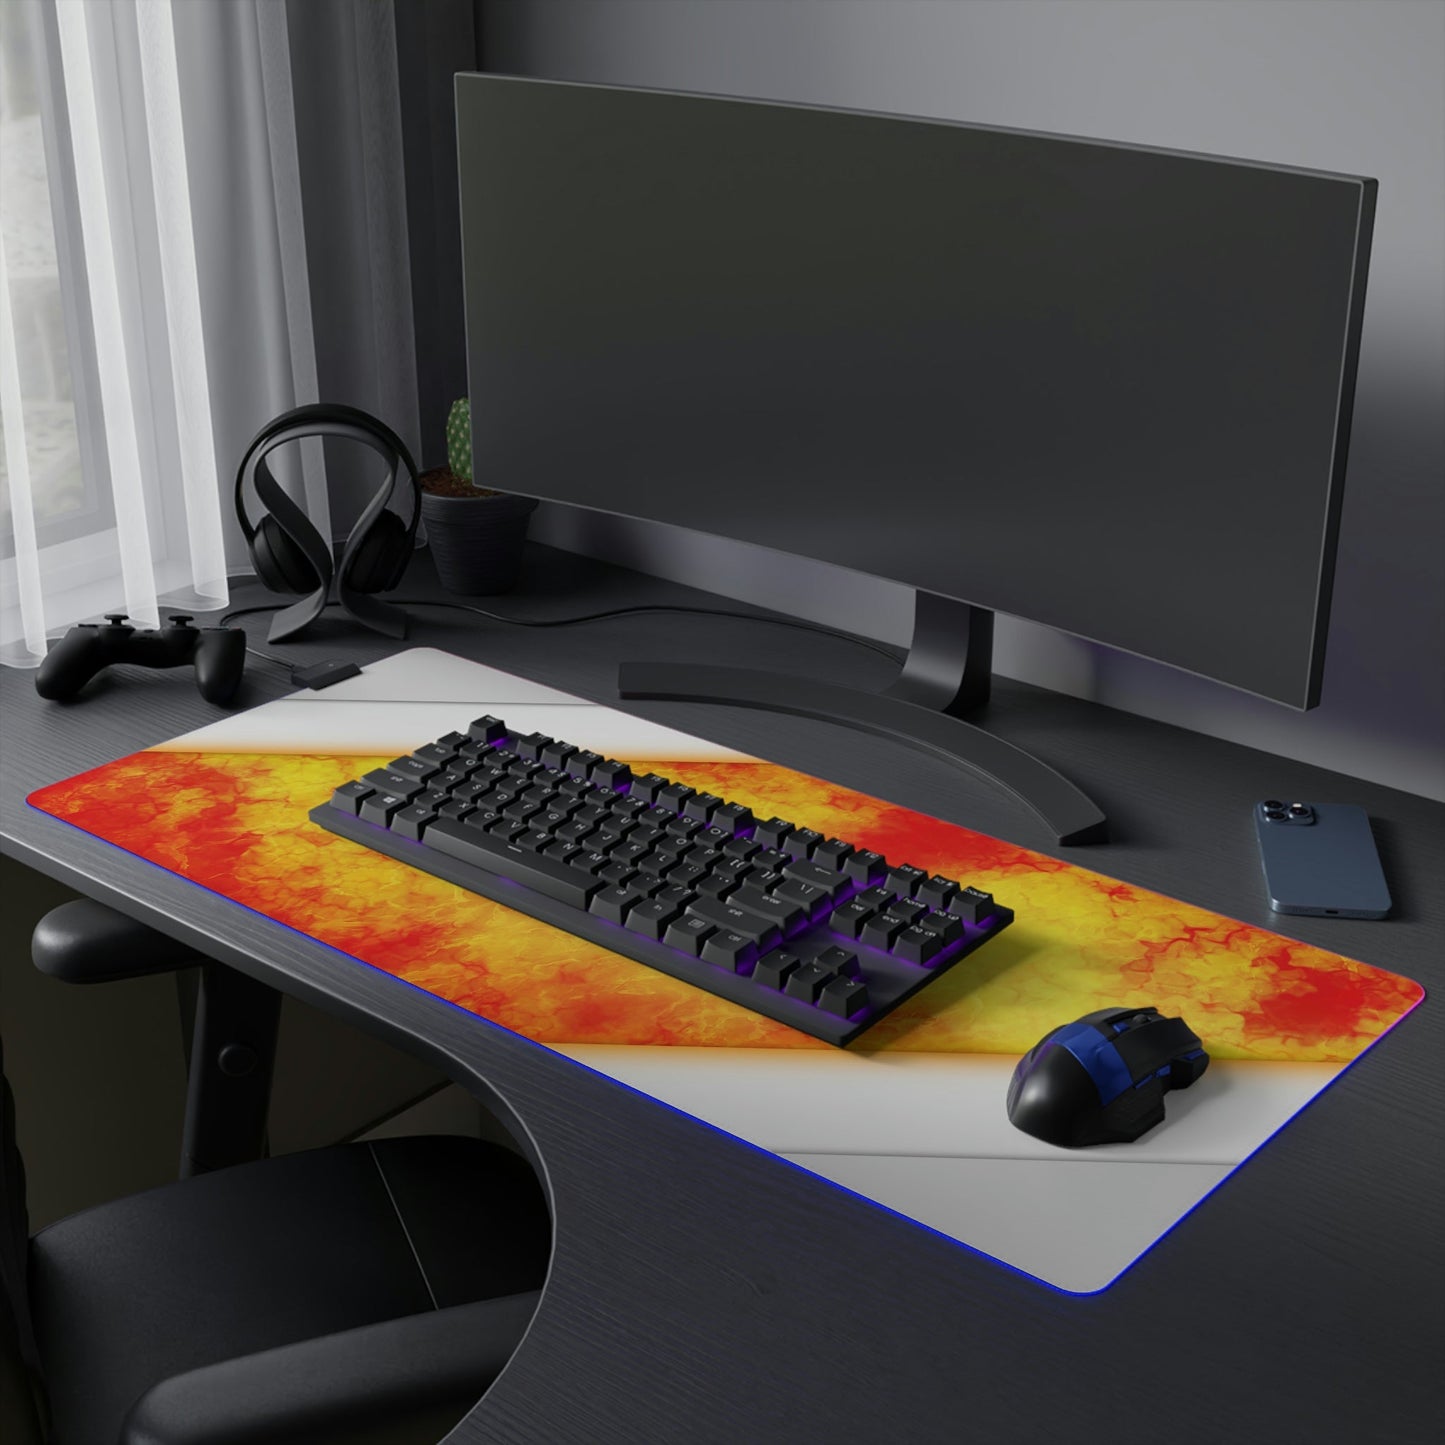 7 Neduz LED Gaming Mouse Pad with Clean Steel Flames Design